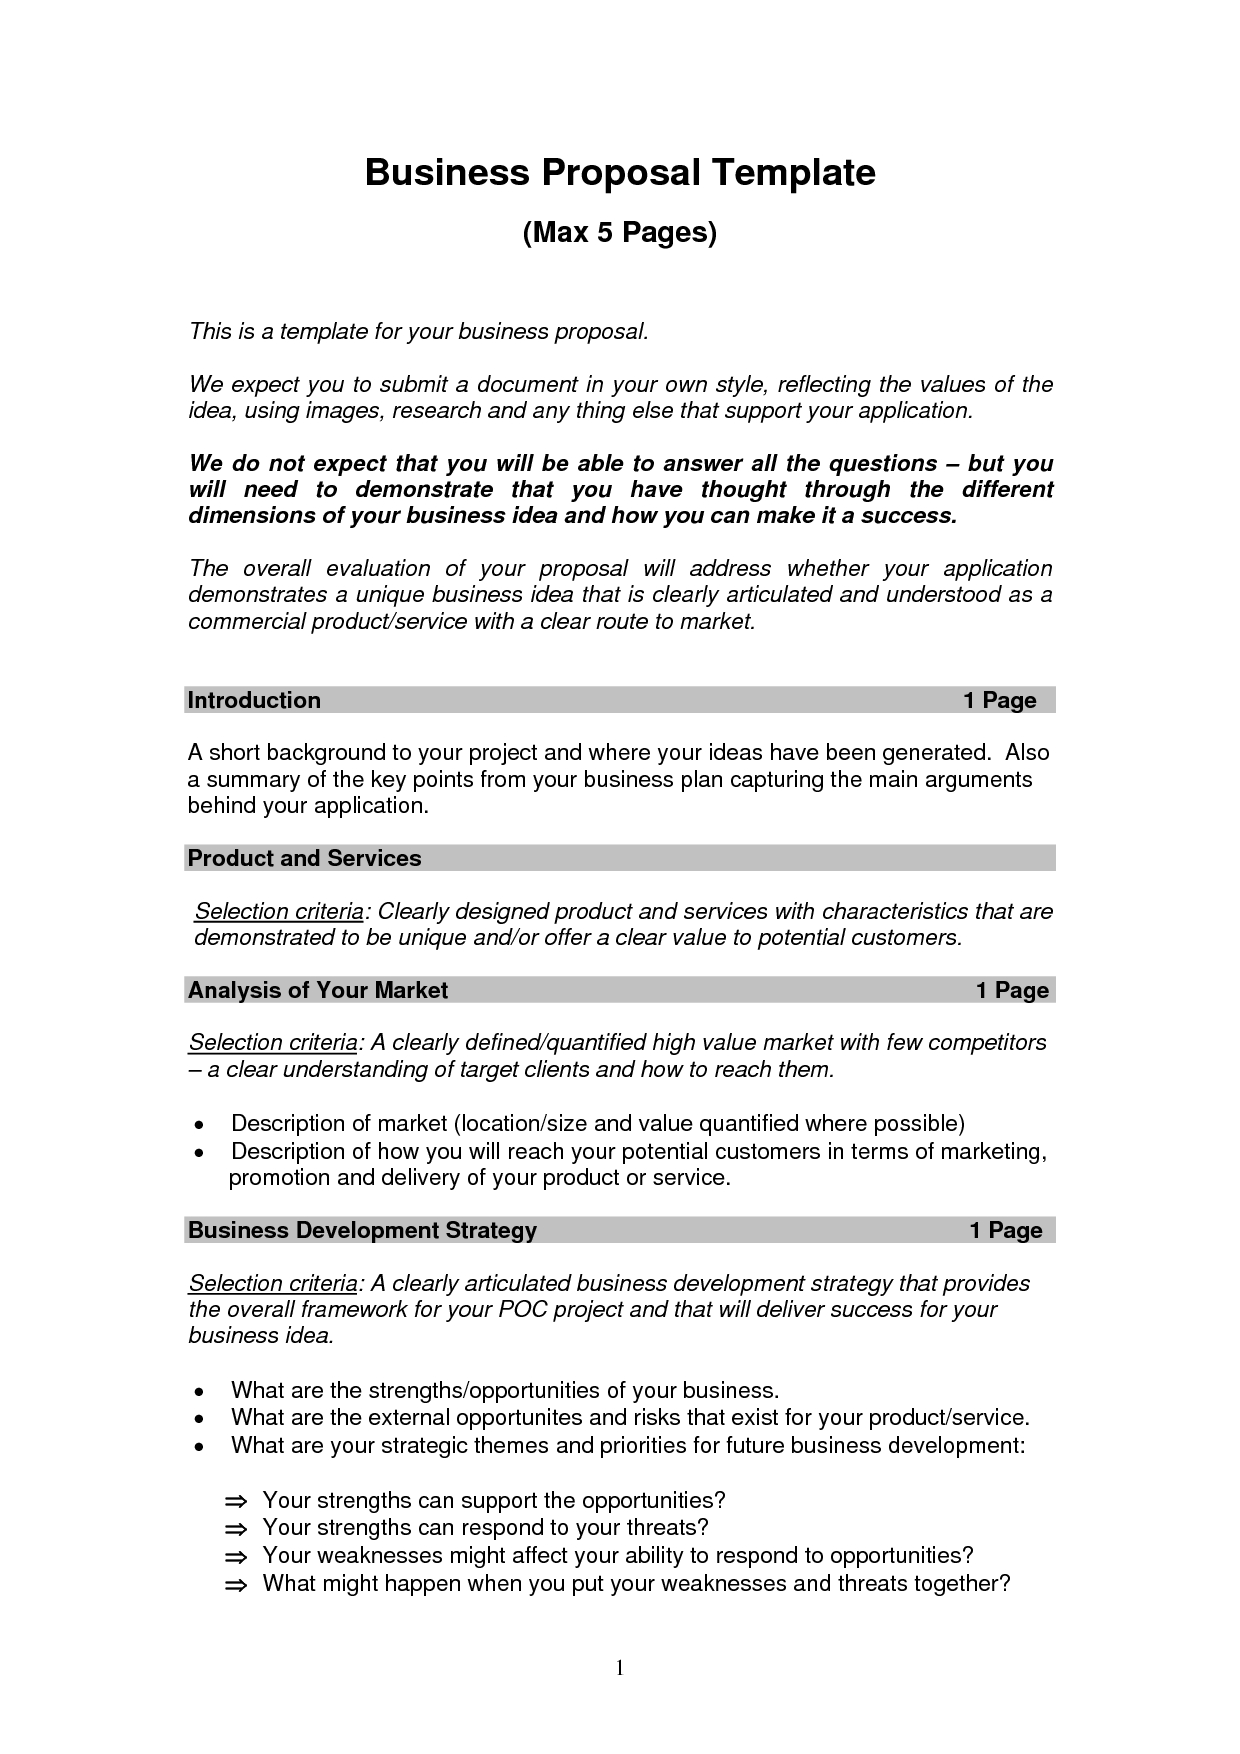 Business Proposal Templates Examples  Business Proposal Sample regarding Written Proposal Template